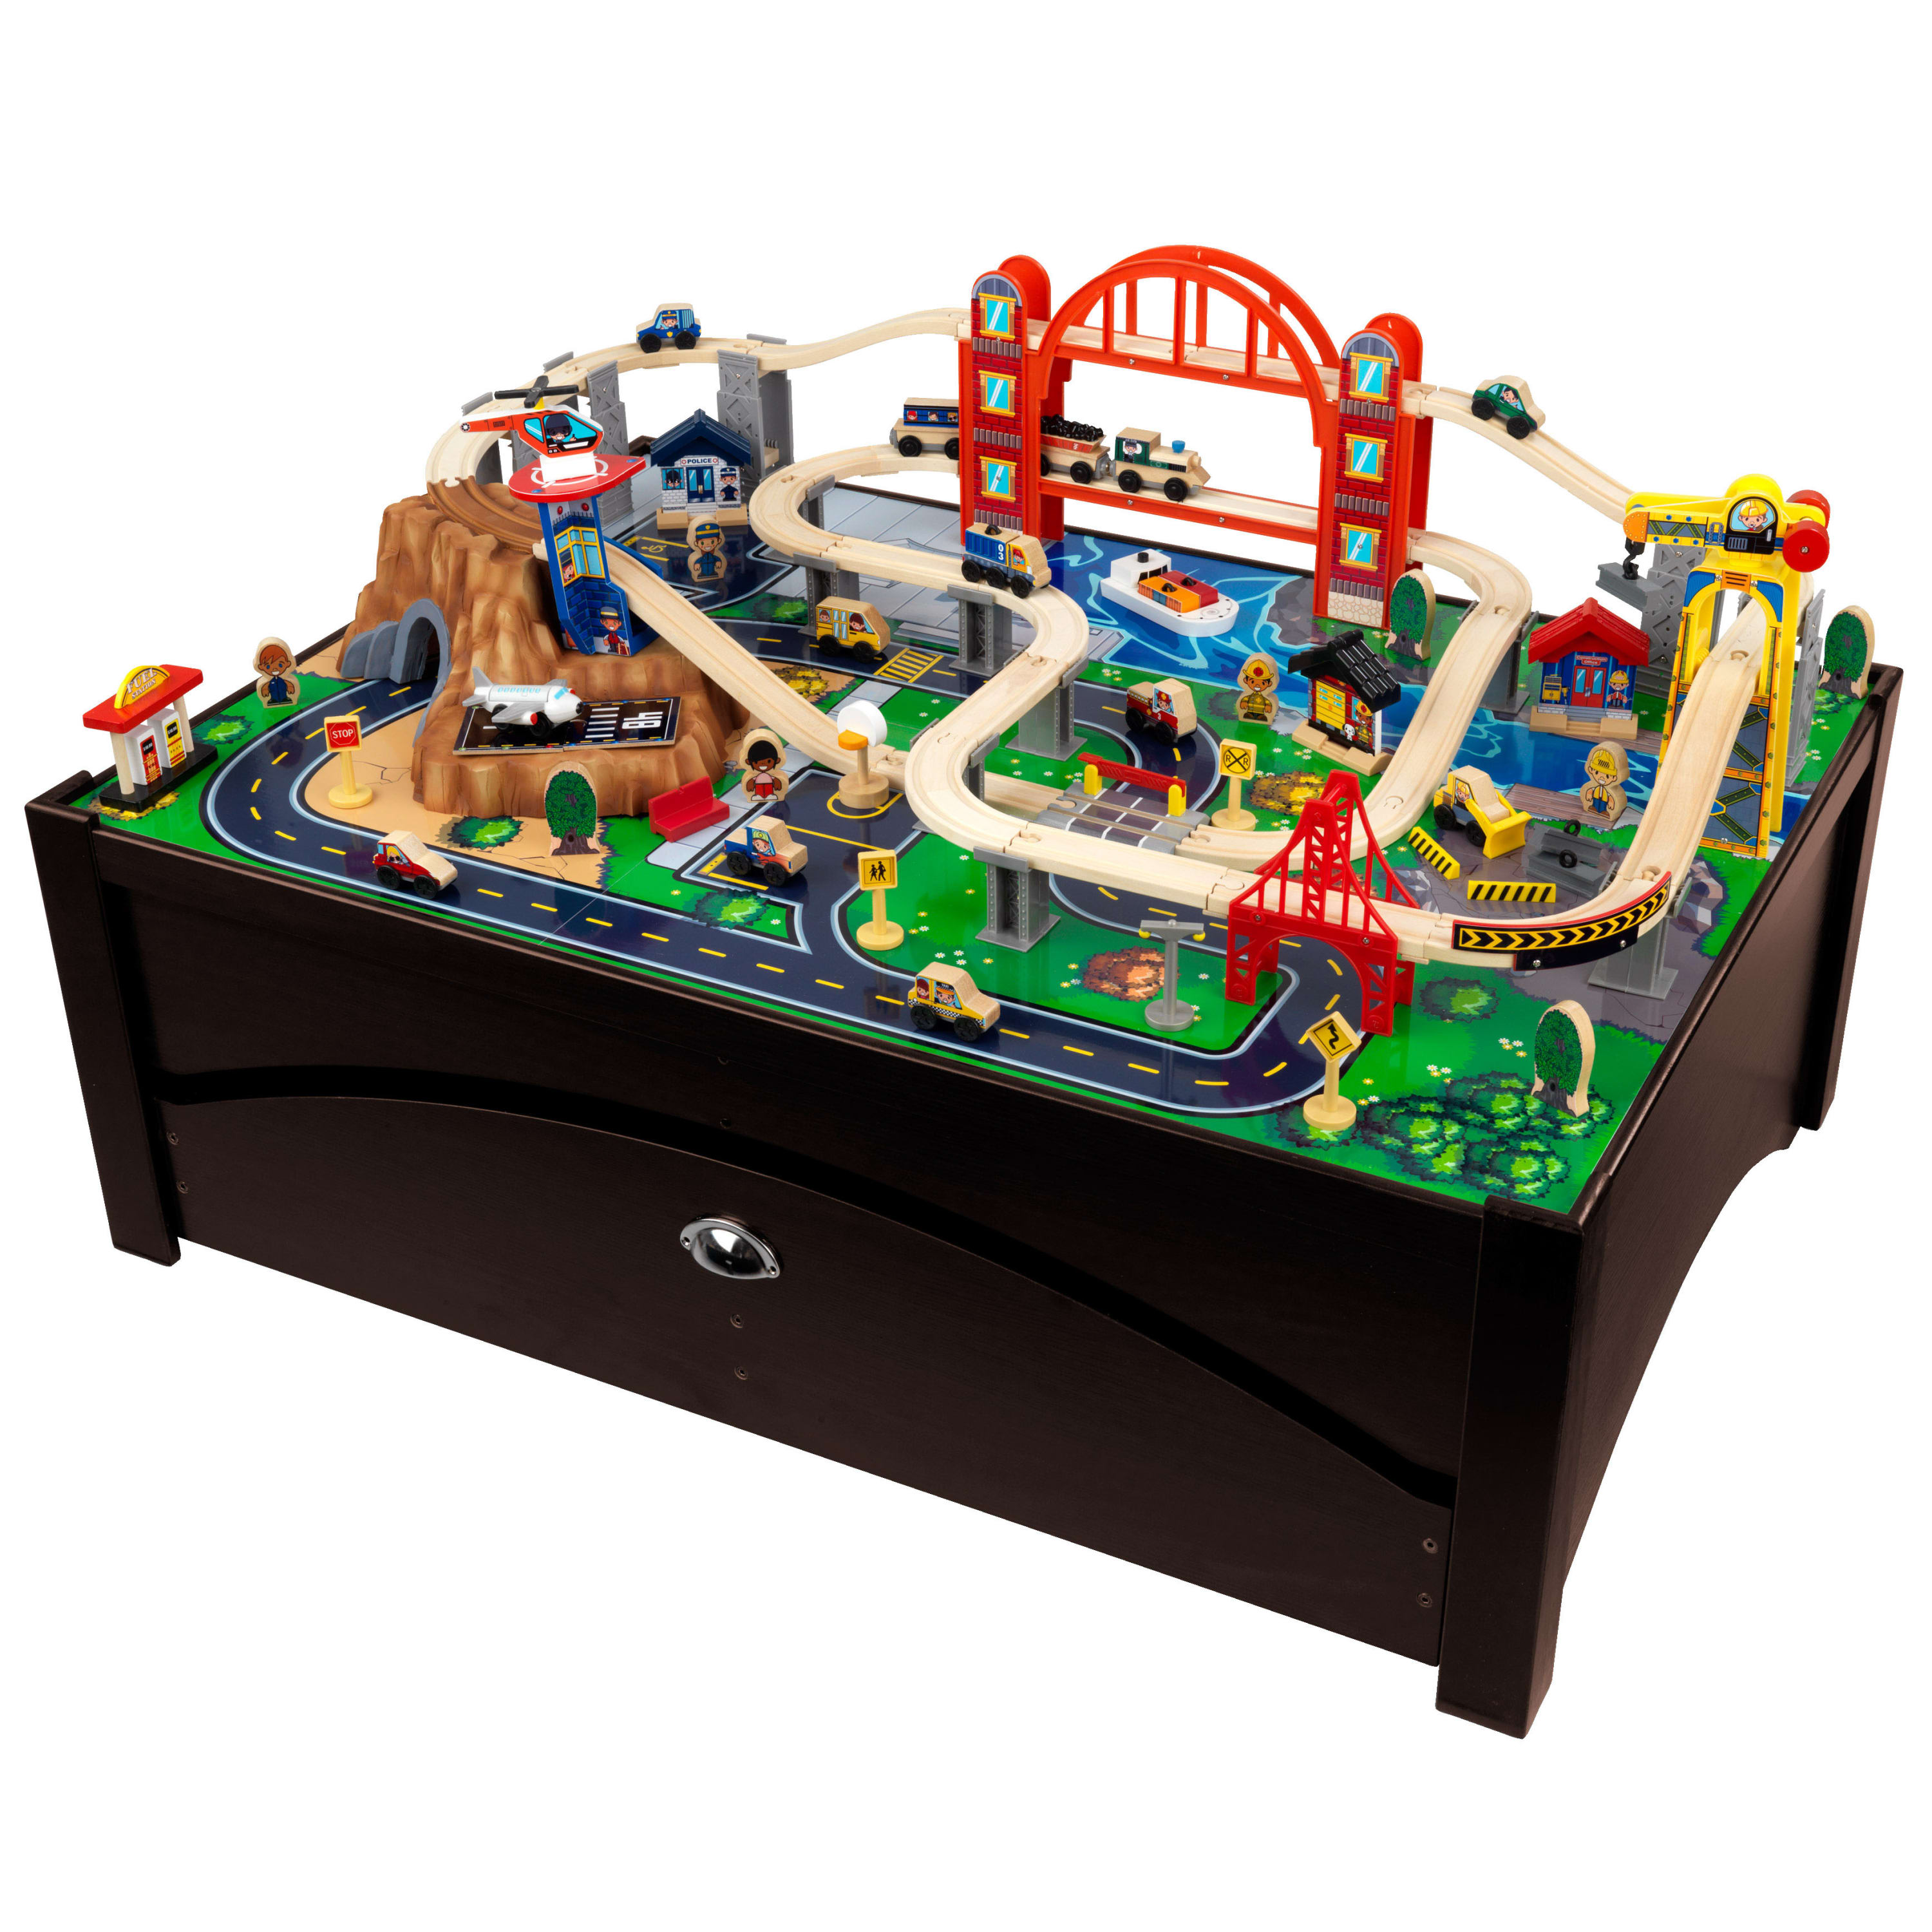 KidKraft Metropolis Wooden Train Set and Train Table with 100 Accessories - image 1 of 10